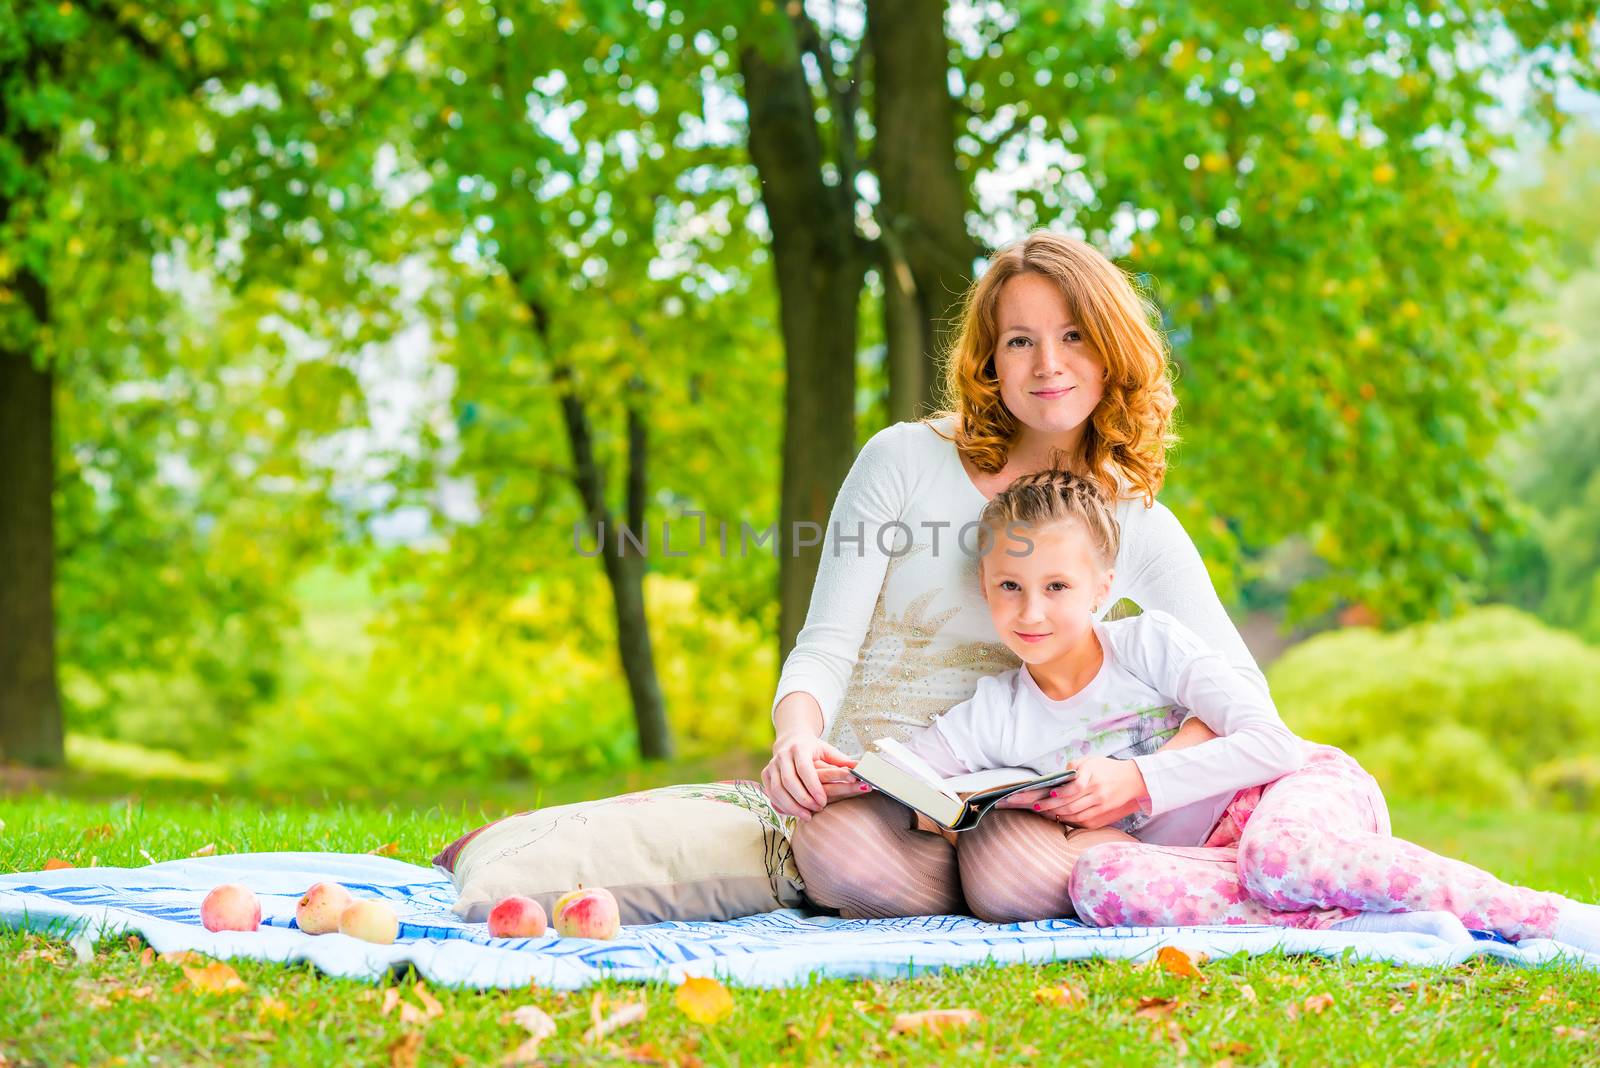 Beautiful mother and daughter spend a weekend at a picnic in the park